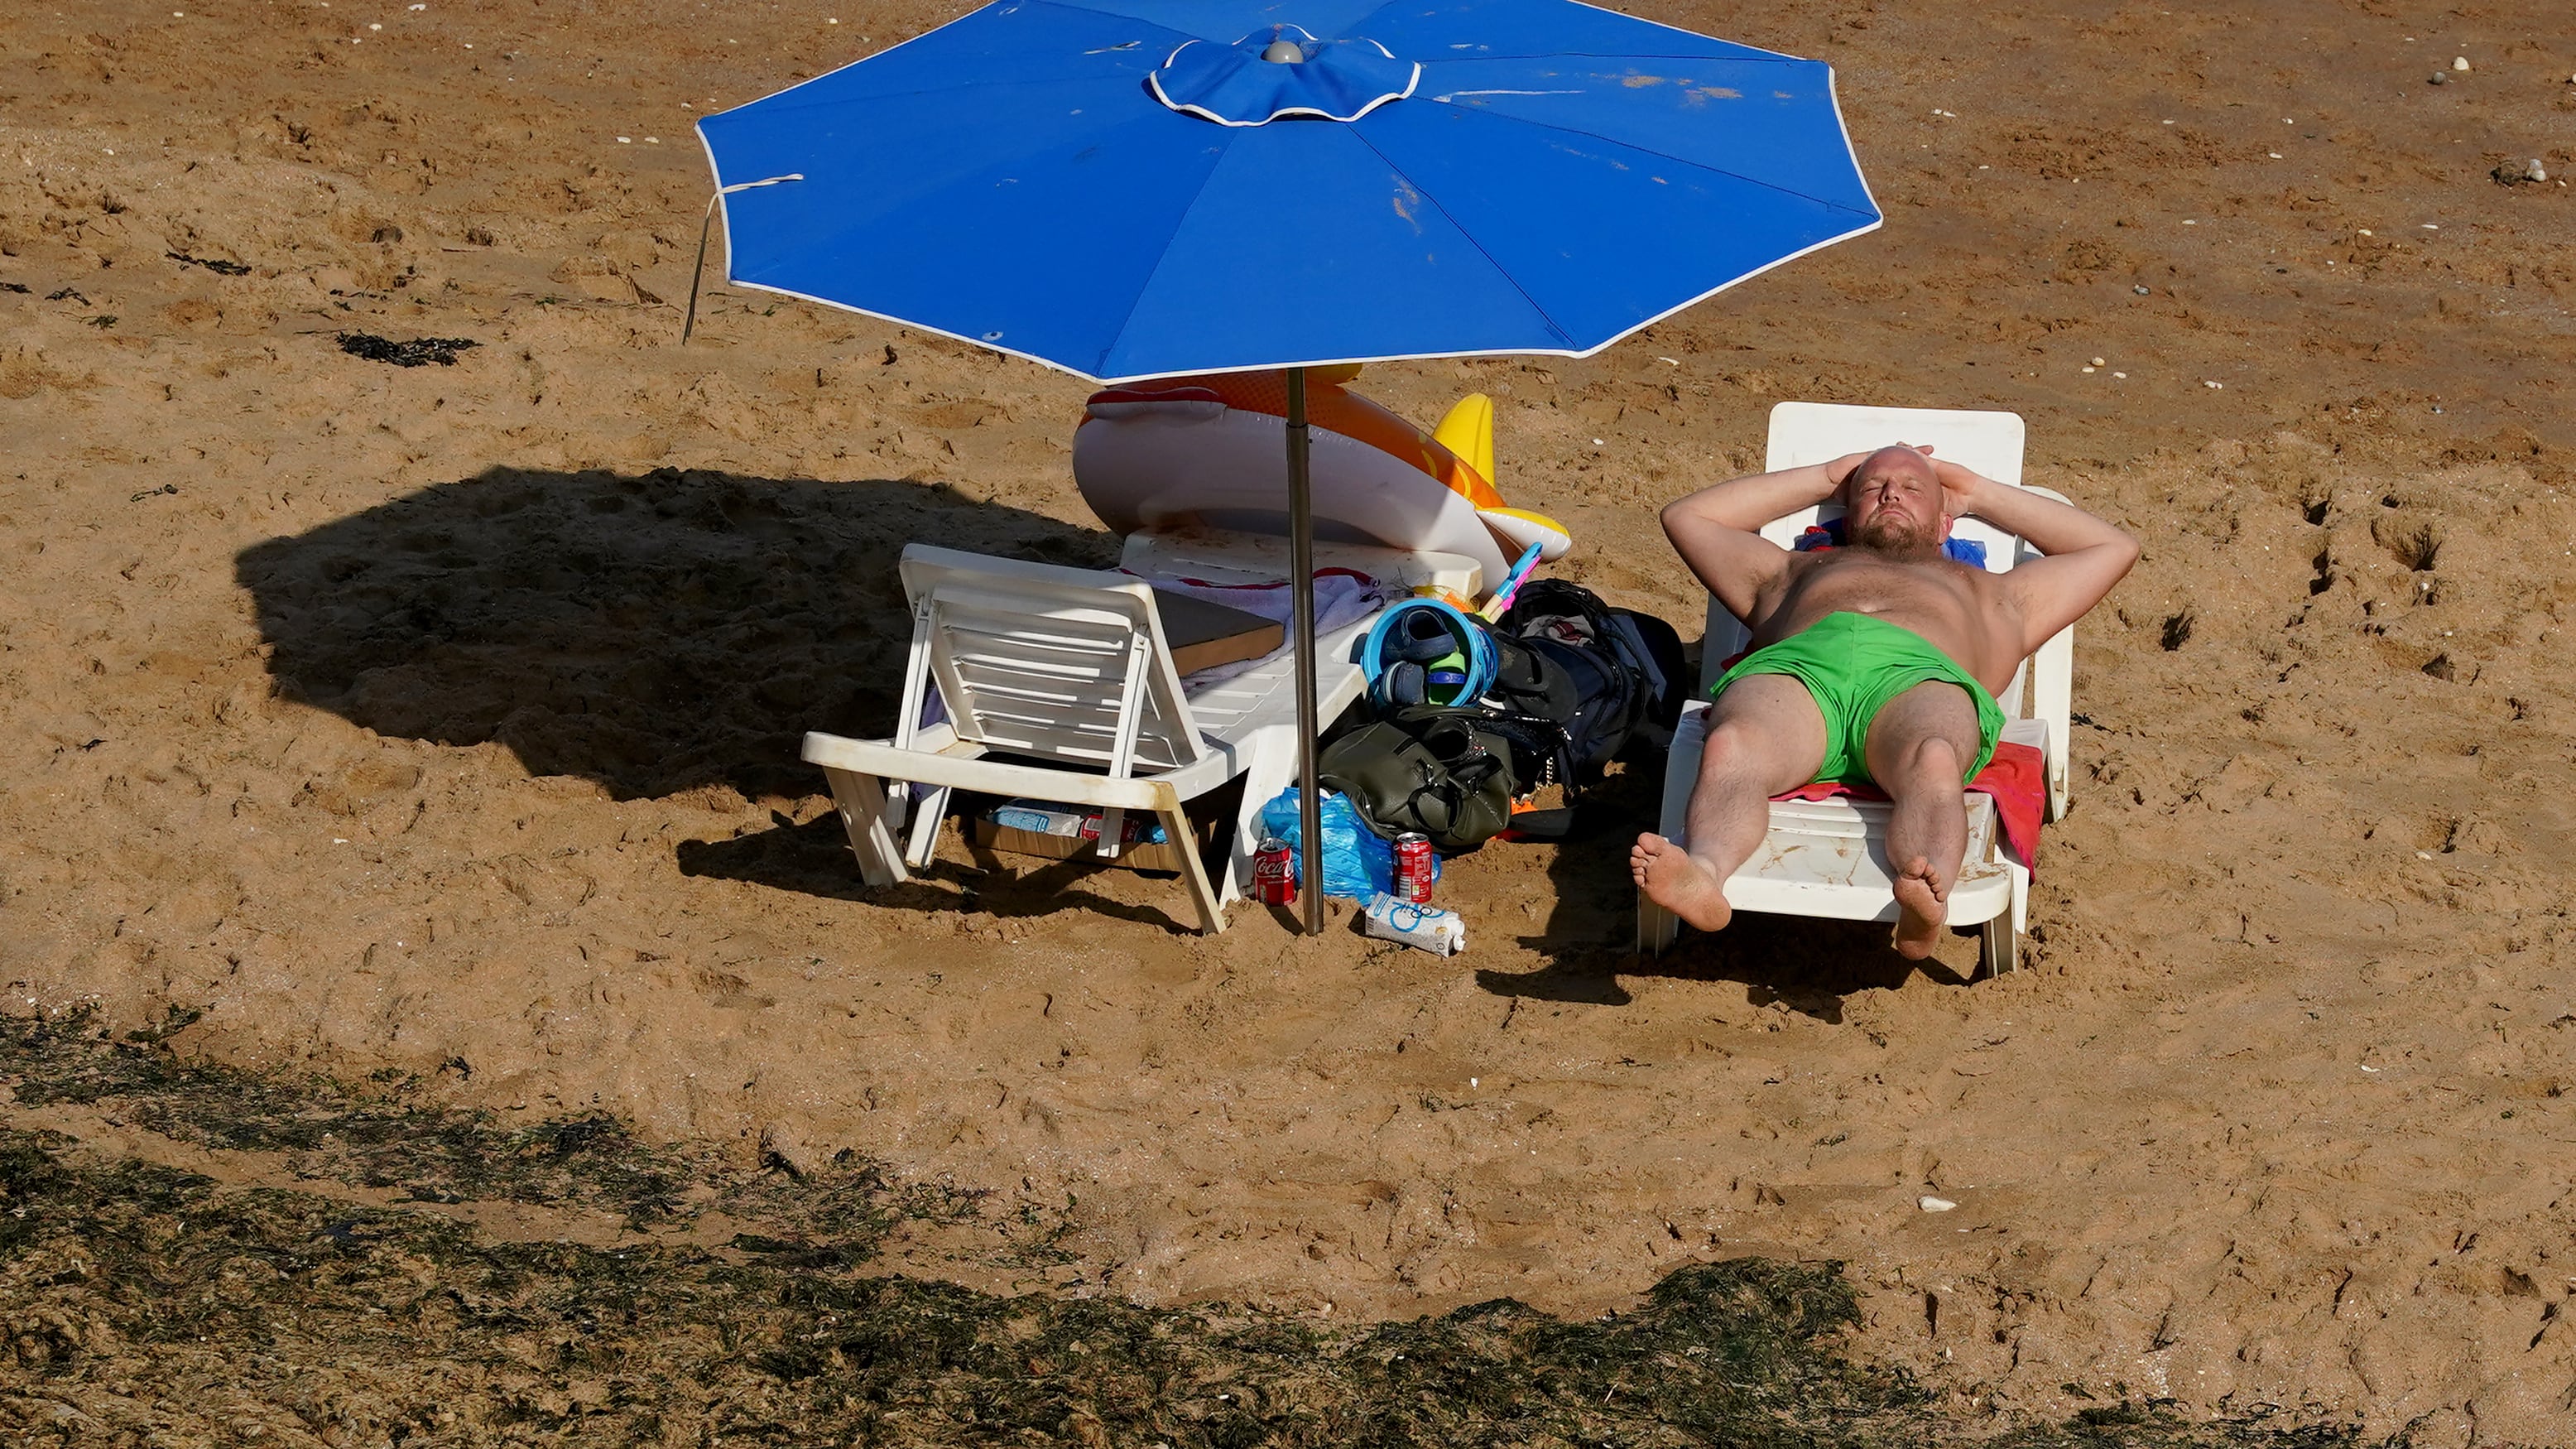 The UK is set for a short spell of warmer weather